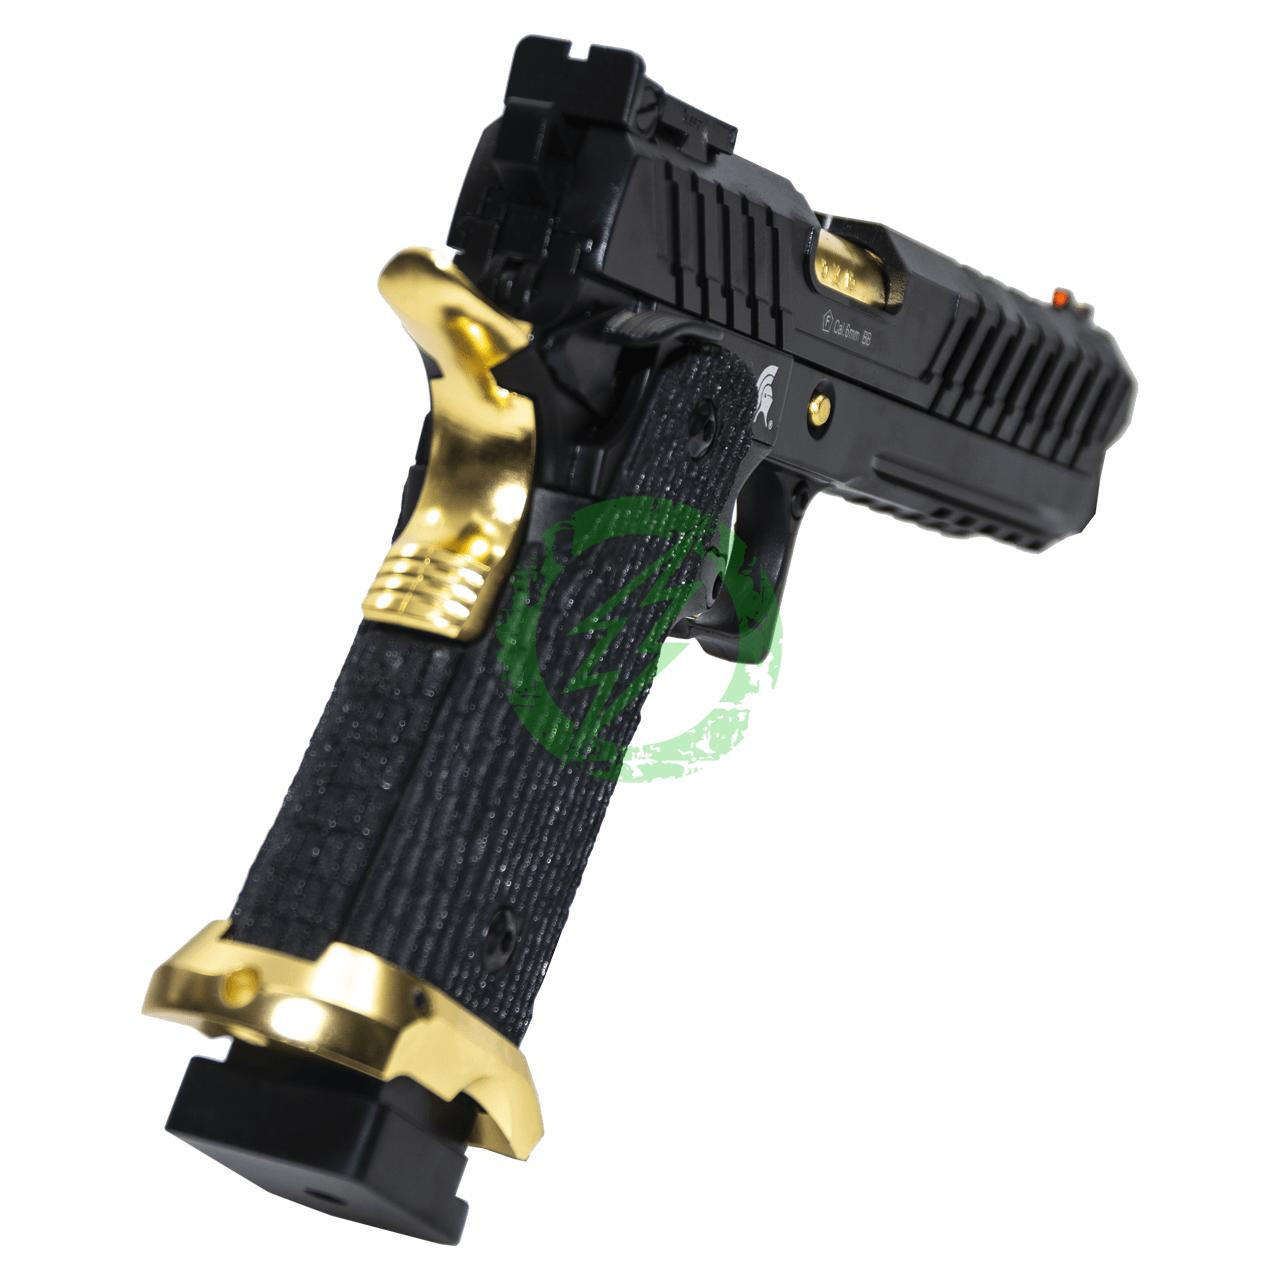  Lancer Tactical KnightShade HiCapa Gas Blowback Airsoft Pistol 